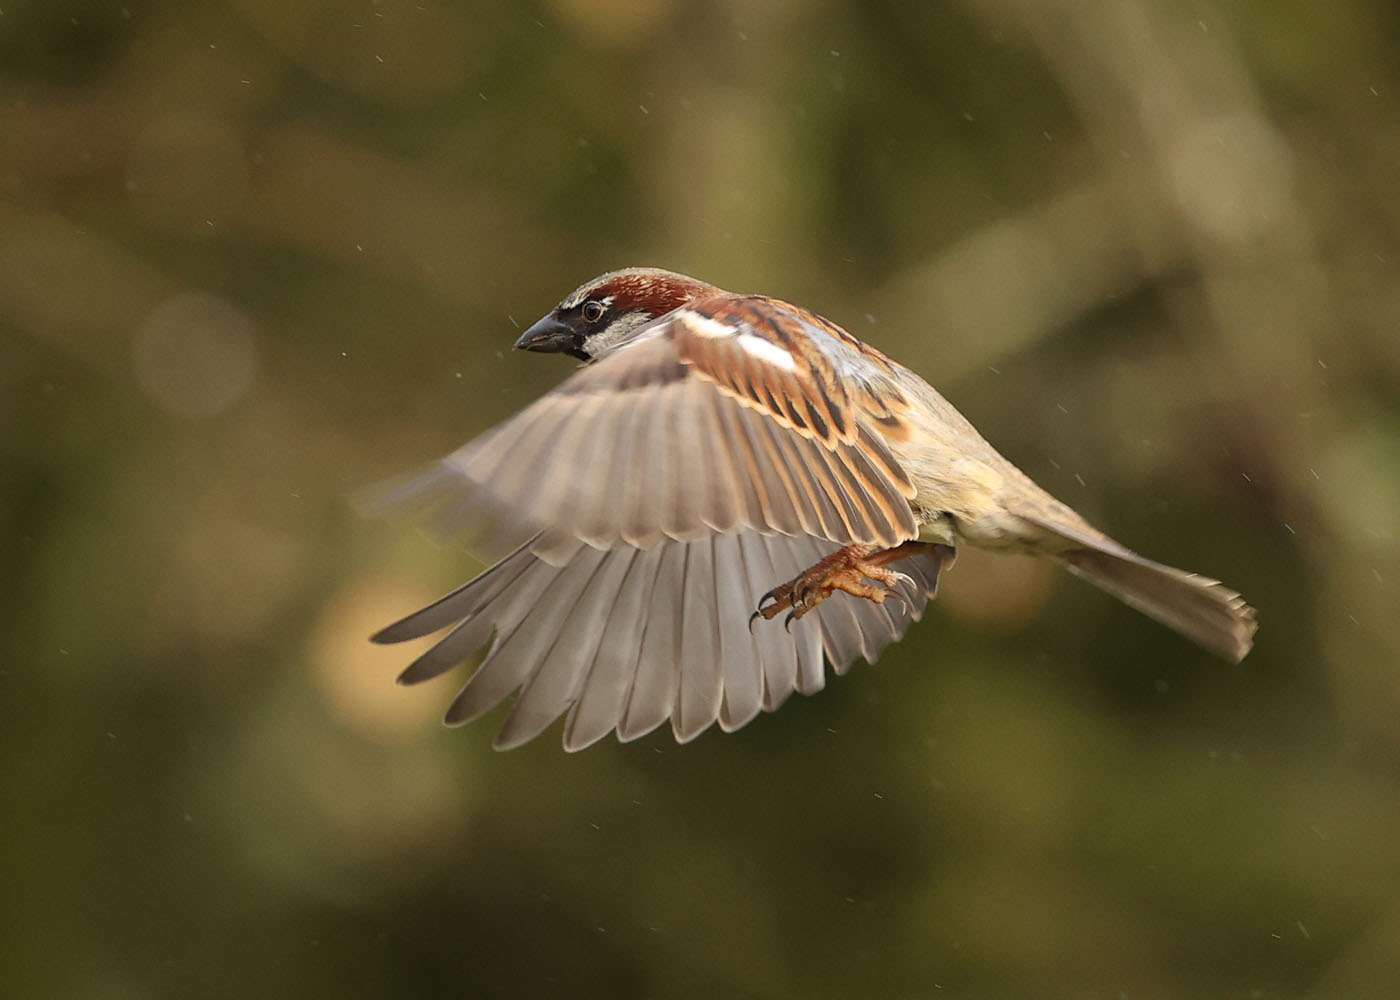 House Sparrow by Steve Hopper at South Brent